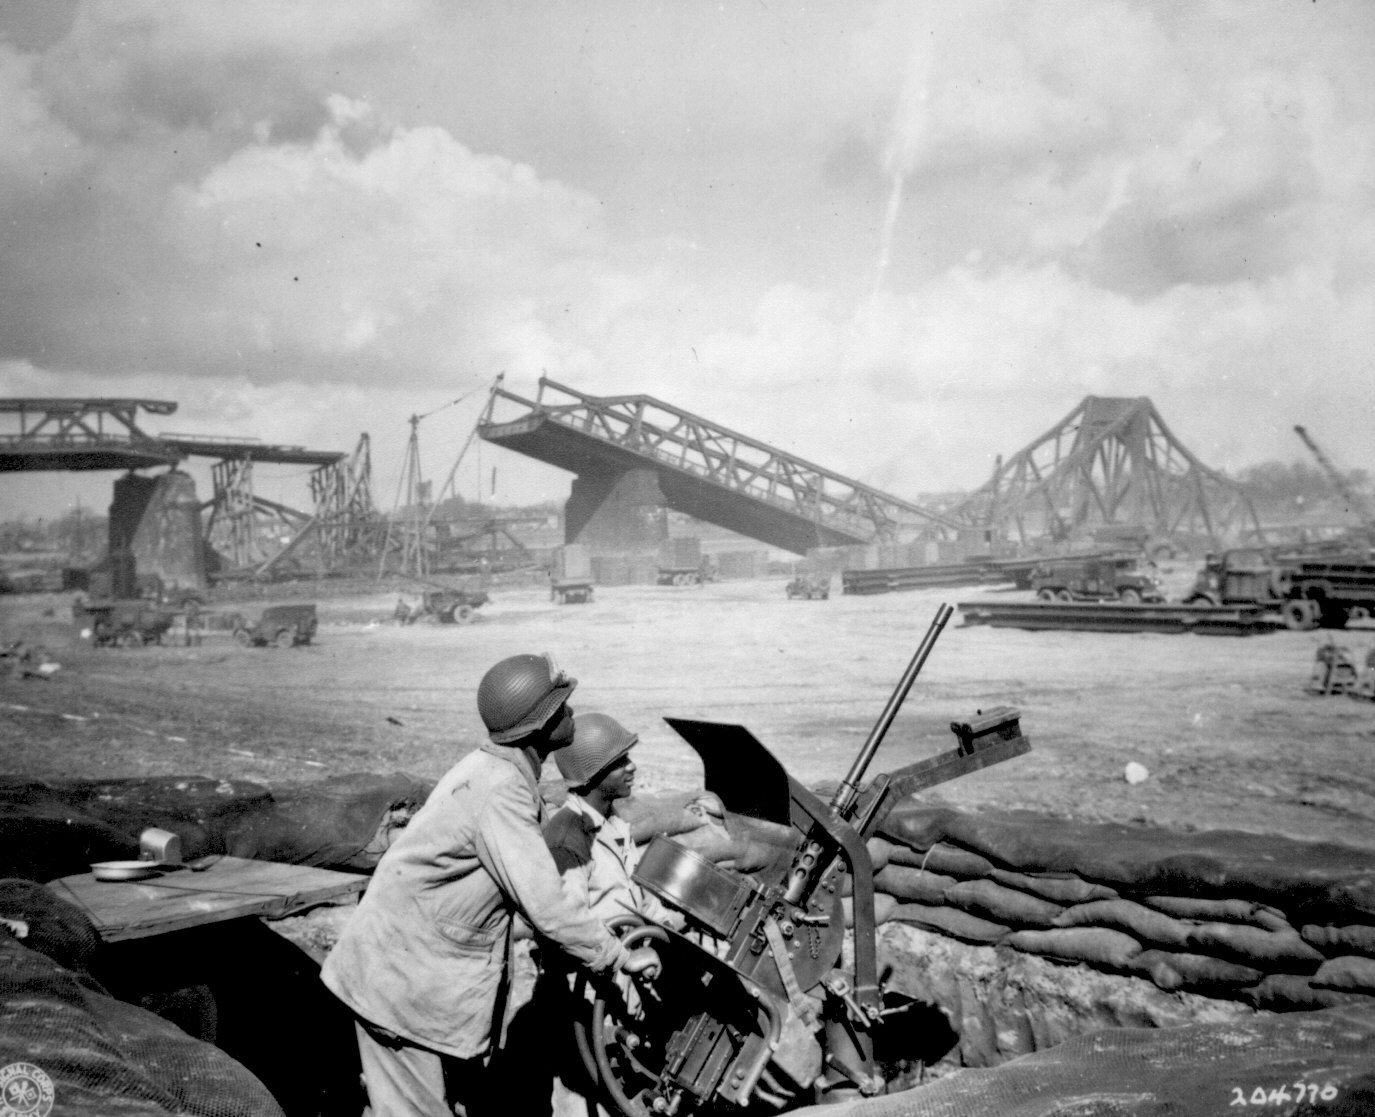 US Army African-American Privates George Cofield and Howard Davis manning an anti-aircraft weapon near a bridge under construction over the Rhine River, 30 Mar 1945